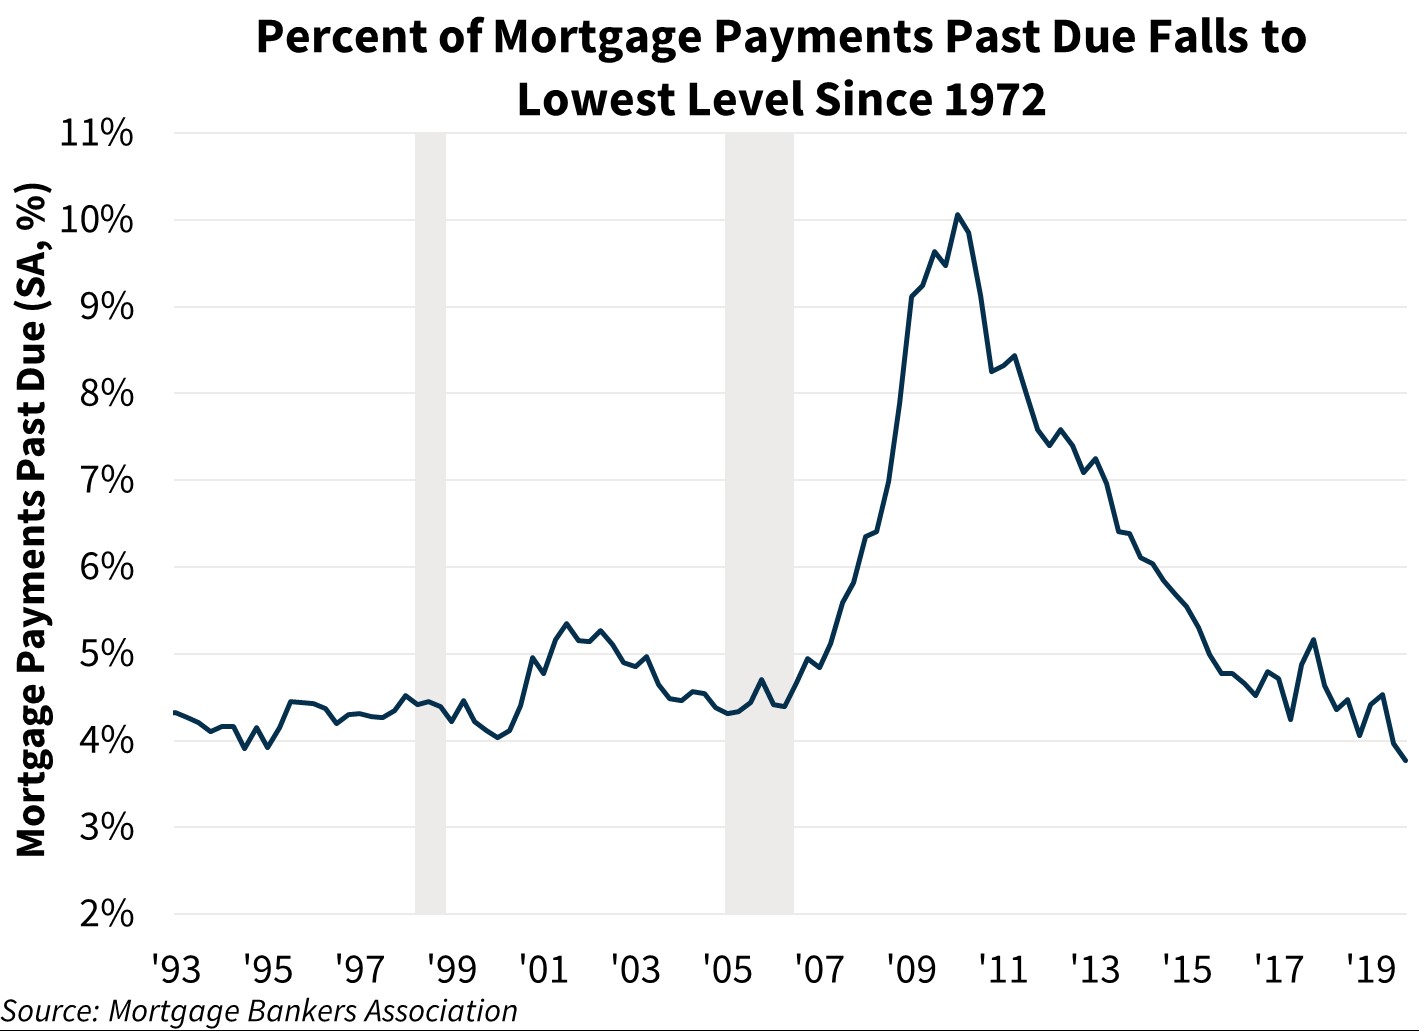 Percent of Mortgage Payments Past Due Falls to Lowest Level Since 1972